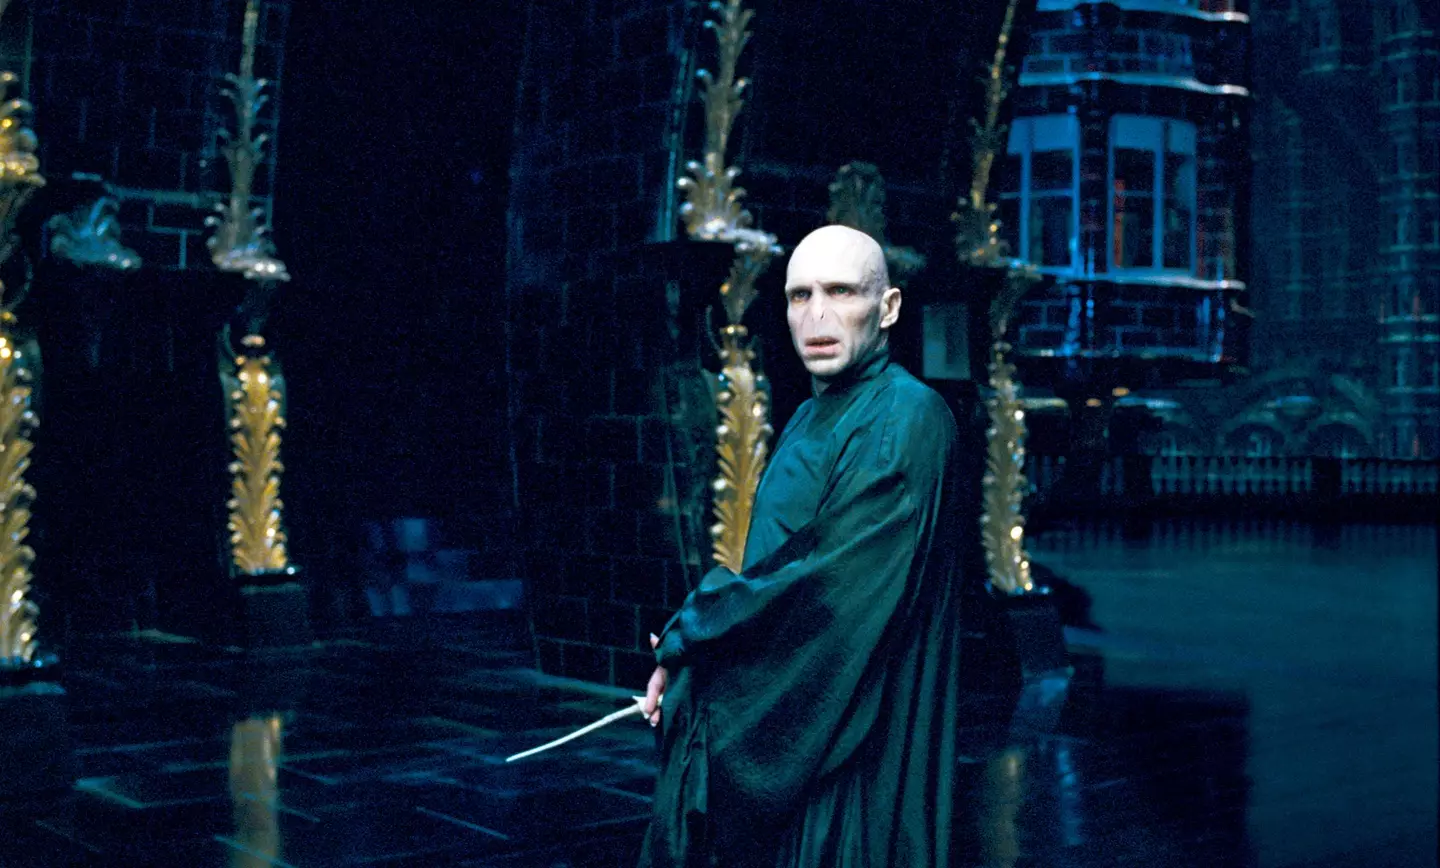 Voldemort was conceived under the effects of a love potion.